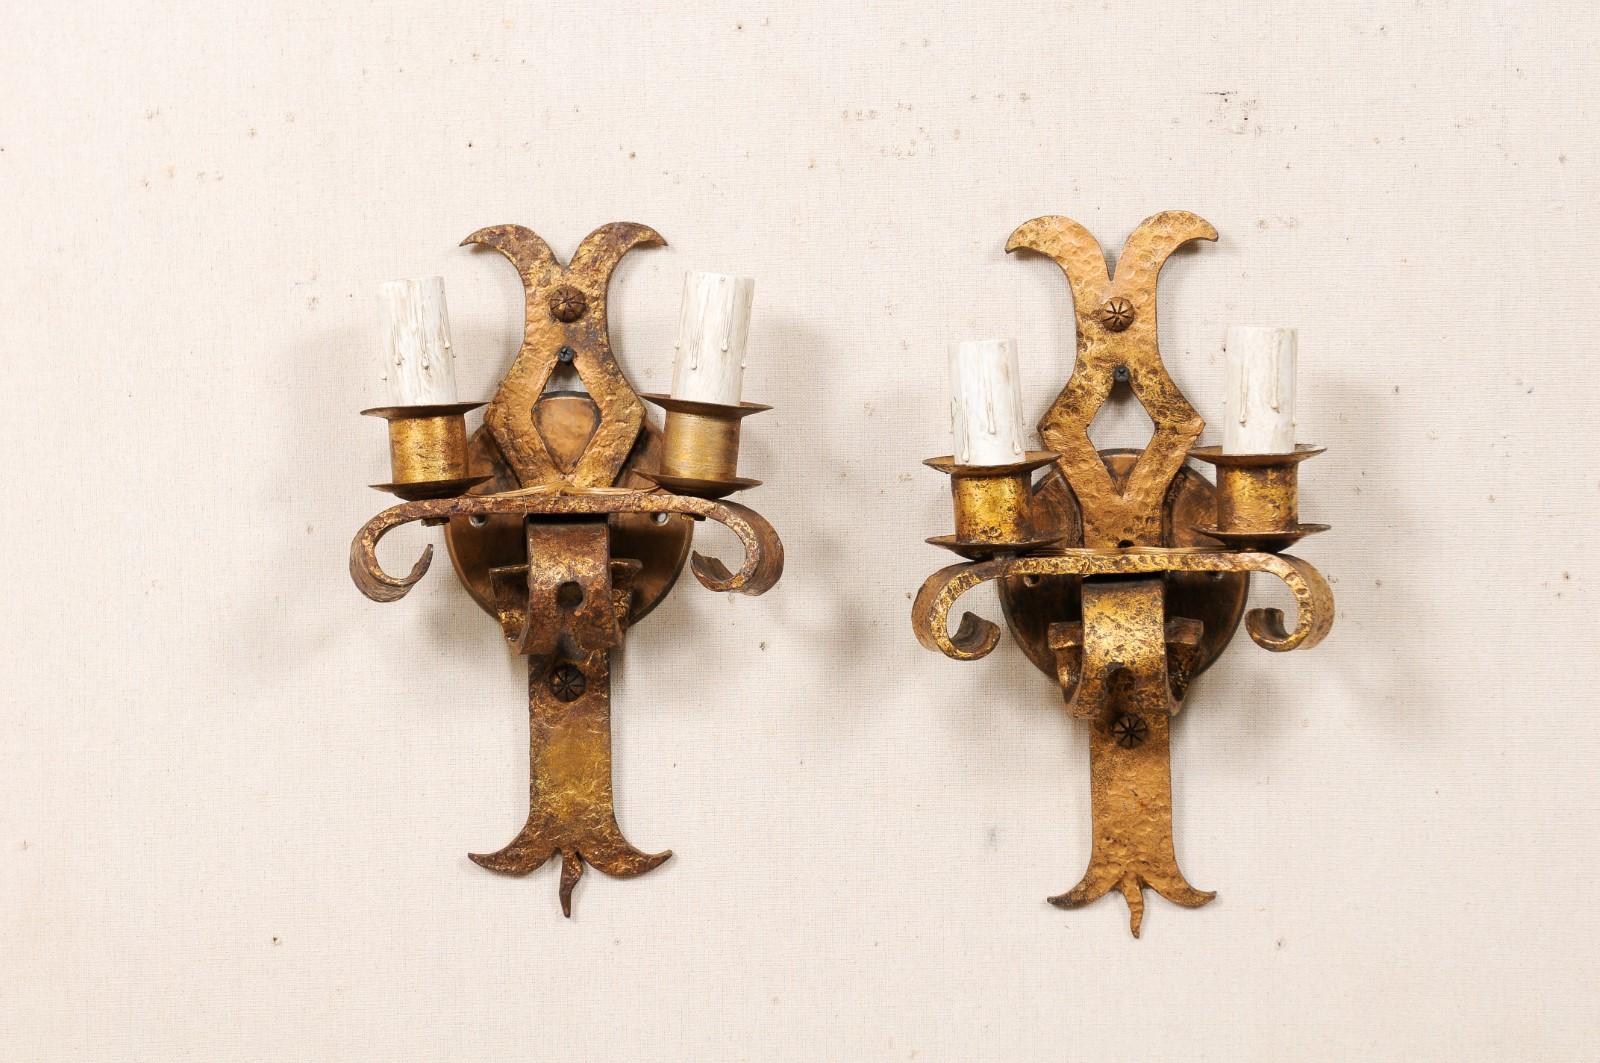 A French pair of two-light iron sconces from the mid-20th century. This vintage pair of French sconces have a linear back plate with splayed top, pierced diamond cutout at center, and ending with a stylized fleur-de-lys motif. A horizontally placed